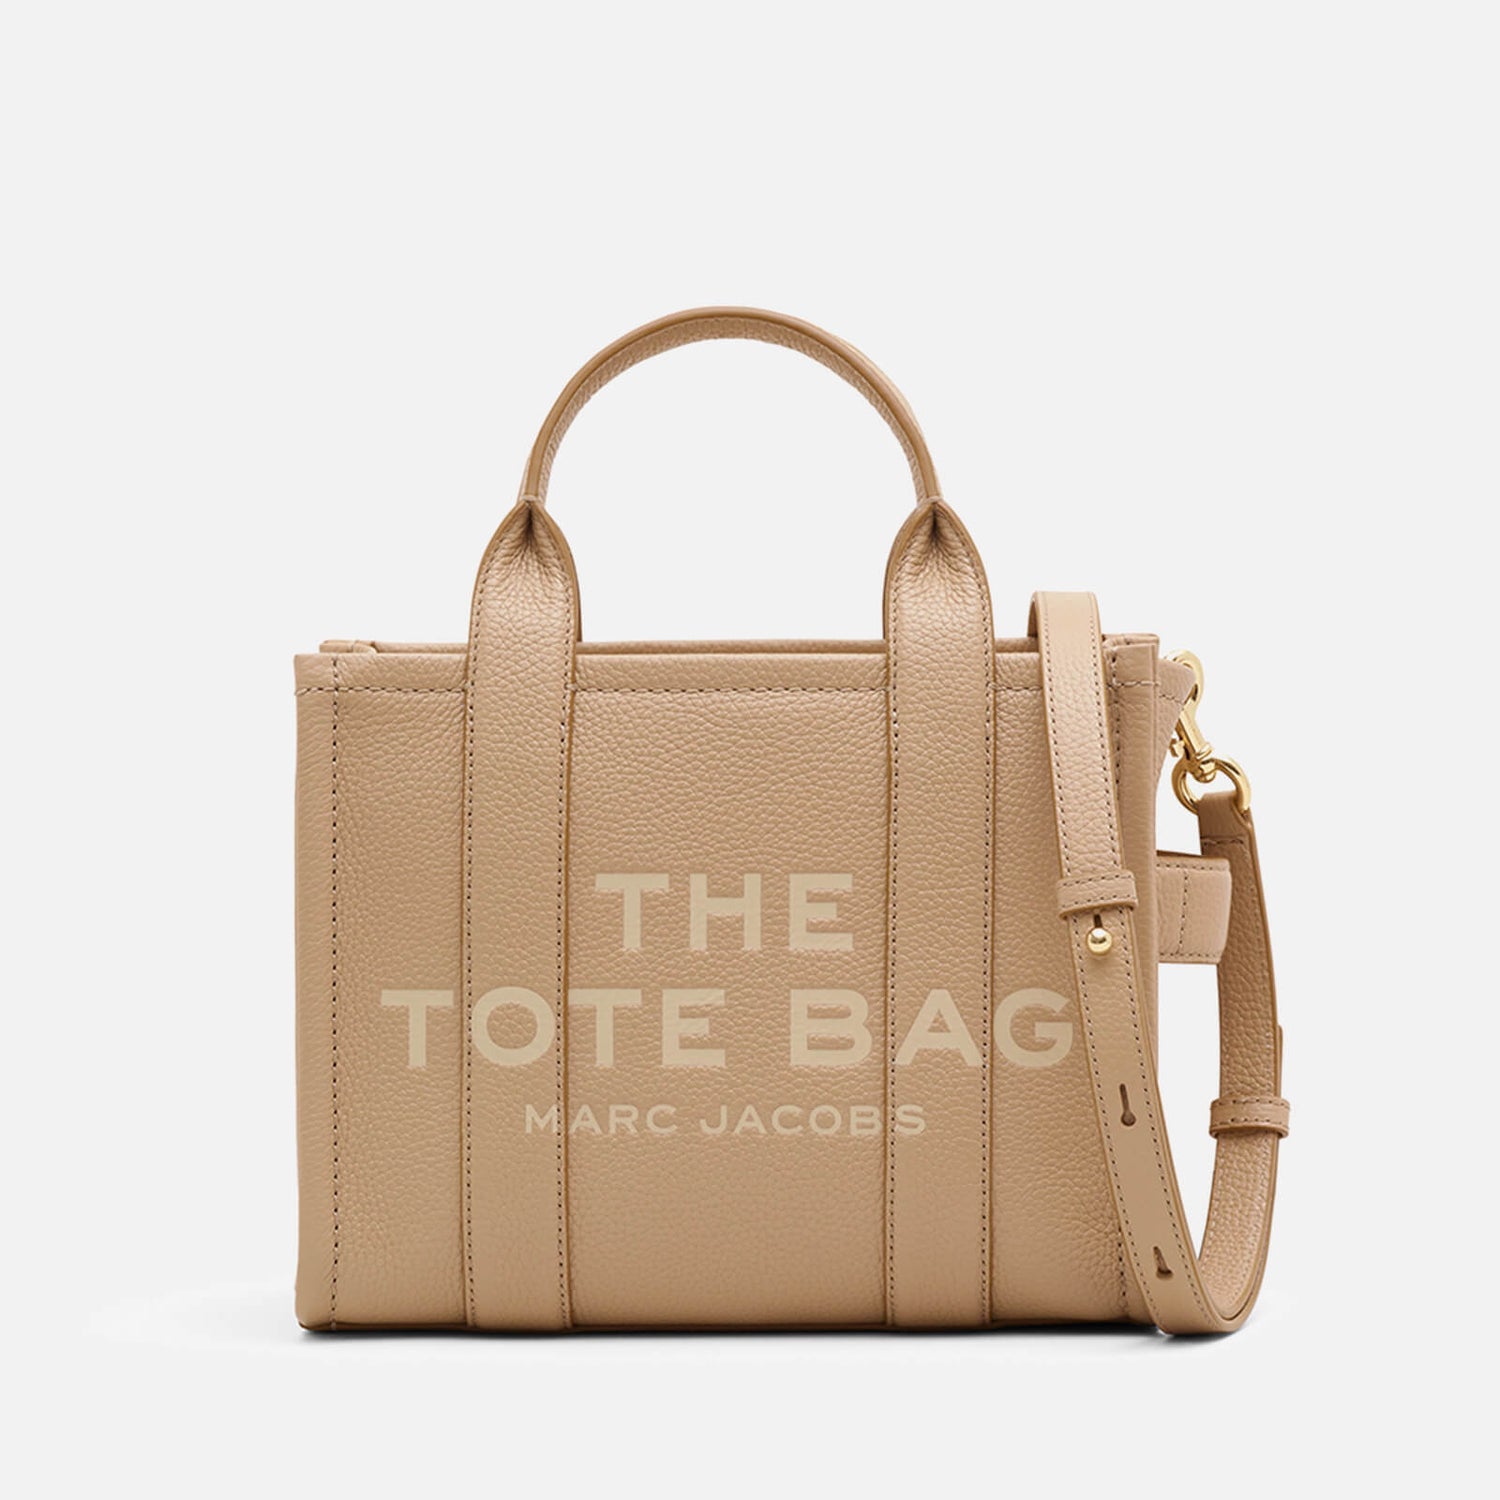 Marc Jacobs The Tote Bag in Grained Leather Small